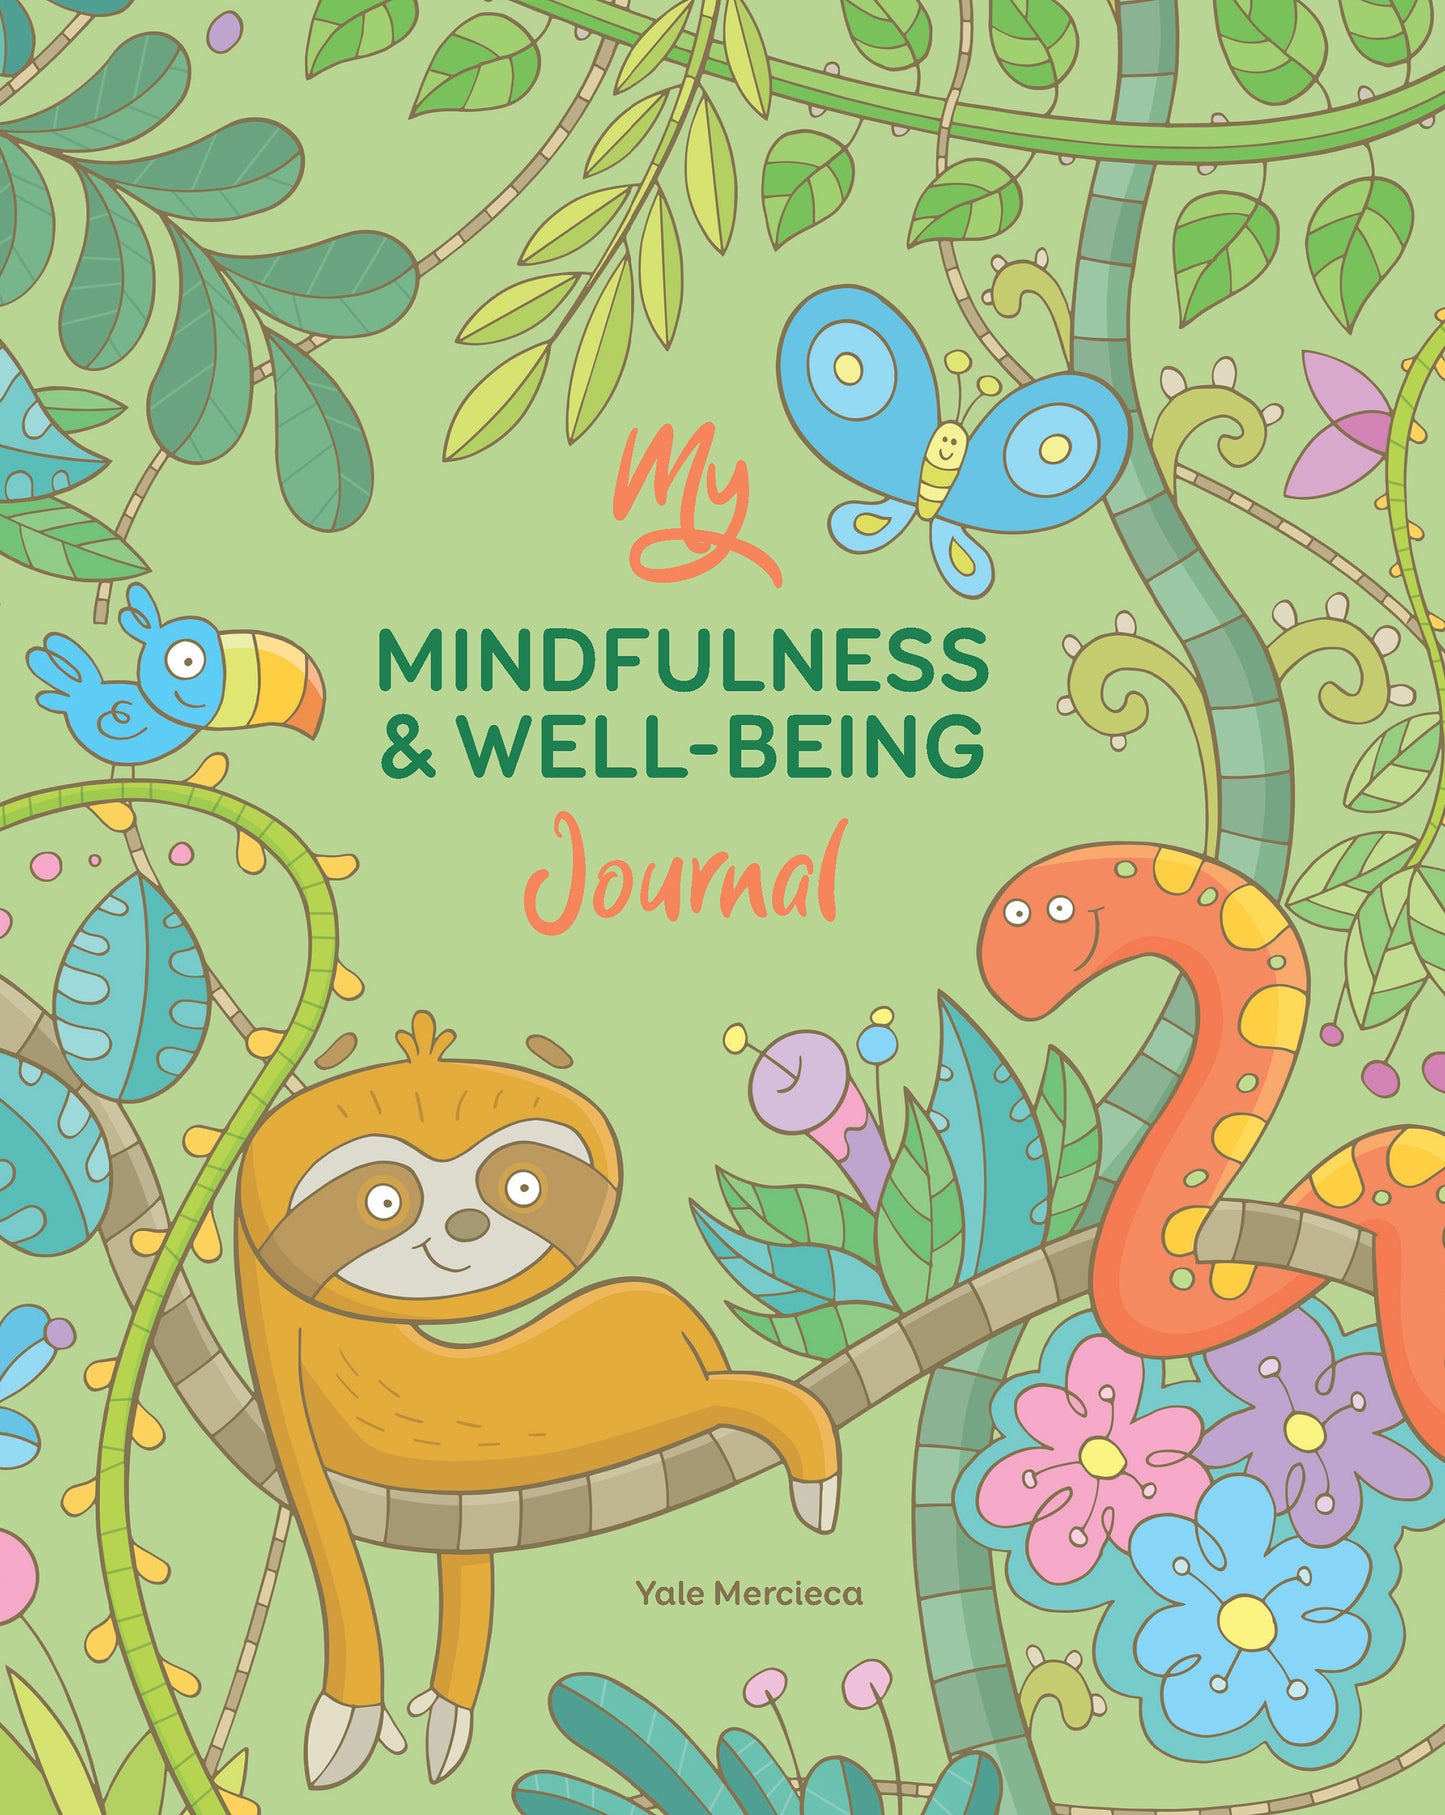 The cover of the book ‘My Mindfulness & Well-Being Journal'